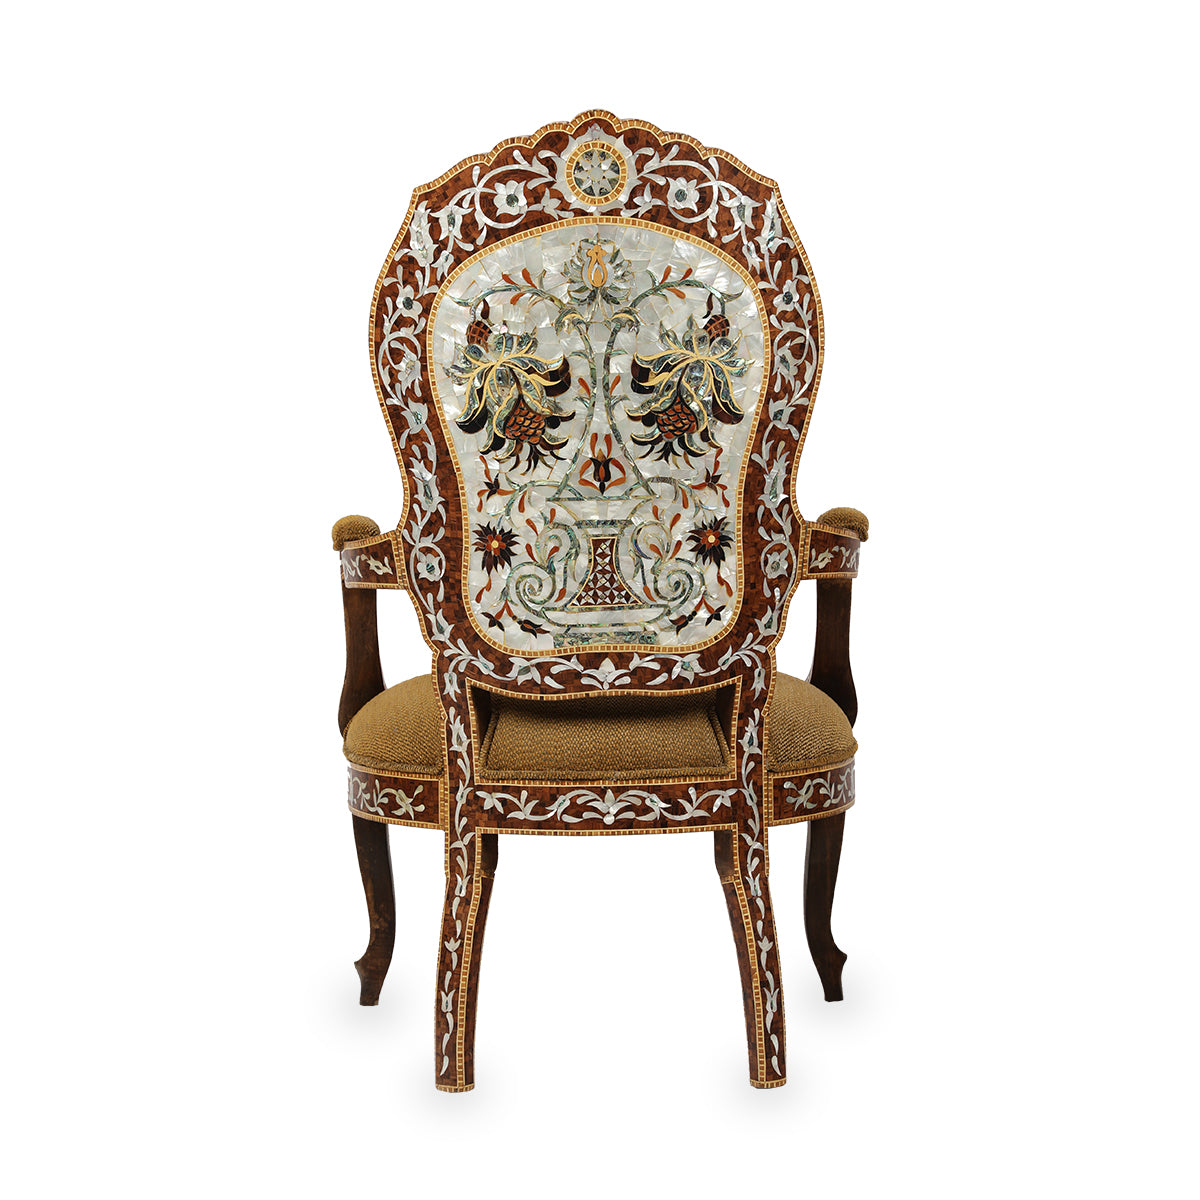 Back View of 20th Century Syrian Armchair with Mother of Pearl Inlays Showcasing Exquisite inlay patterns